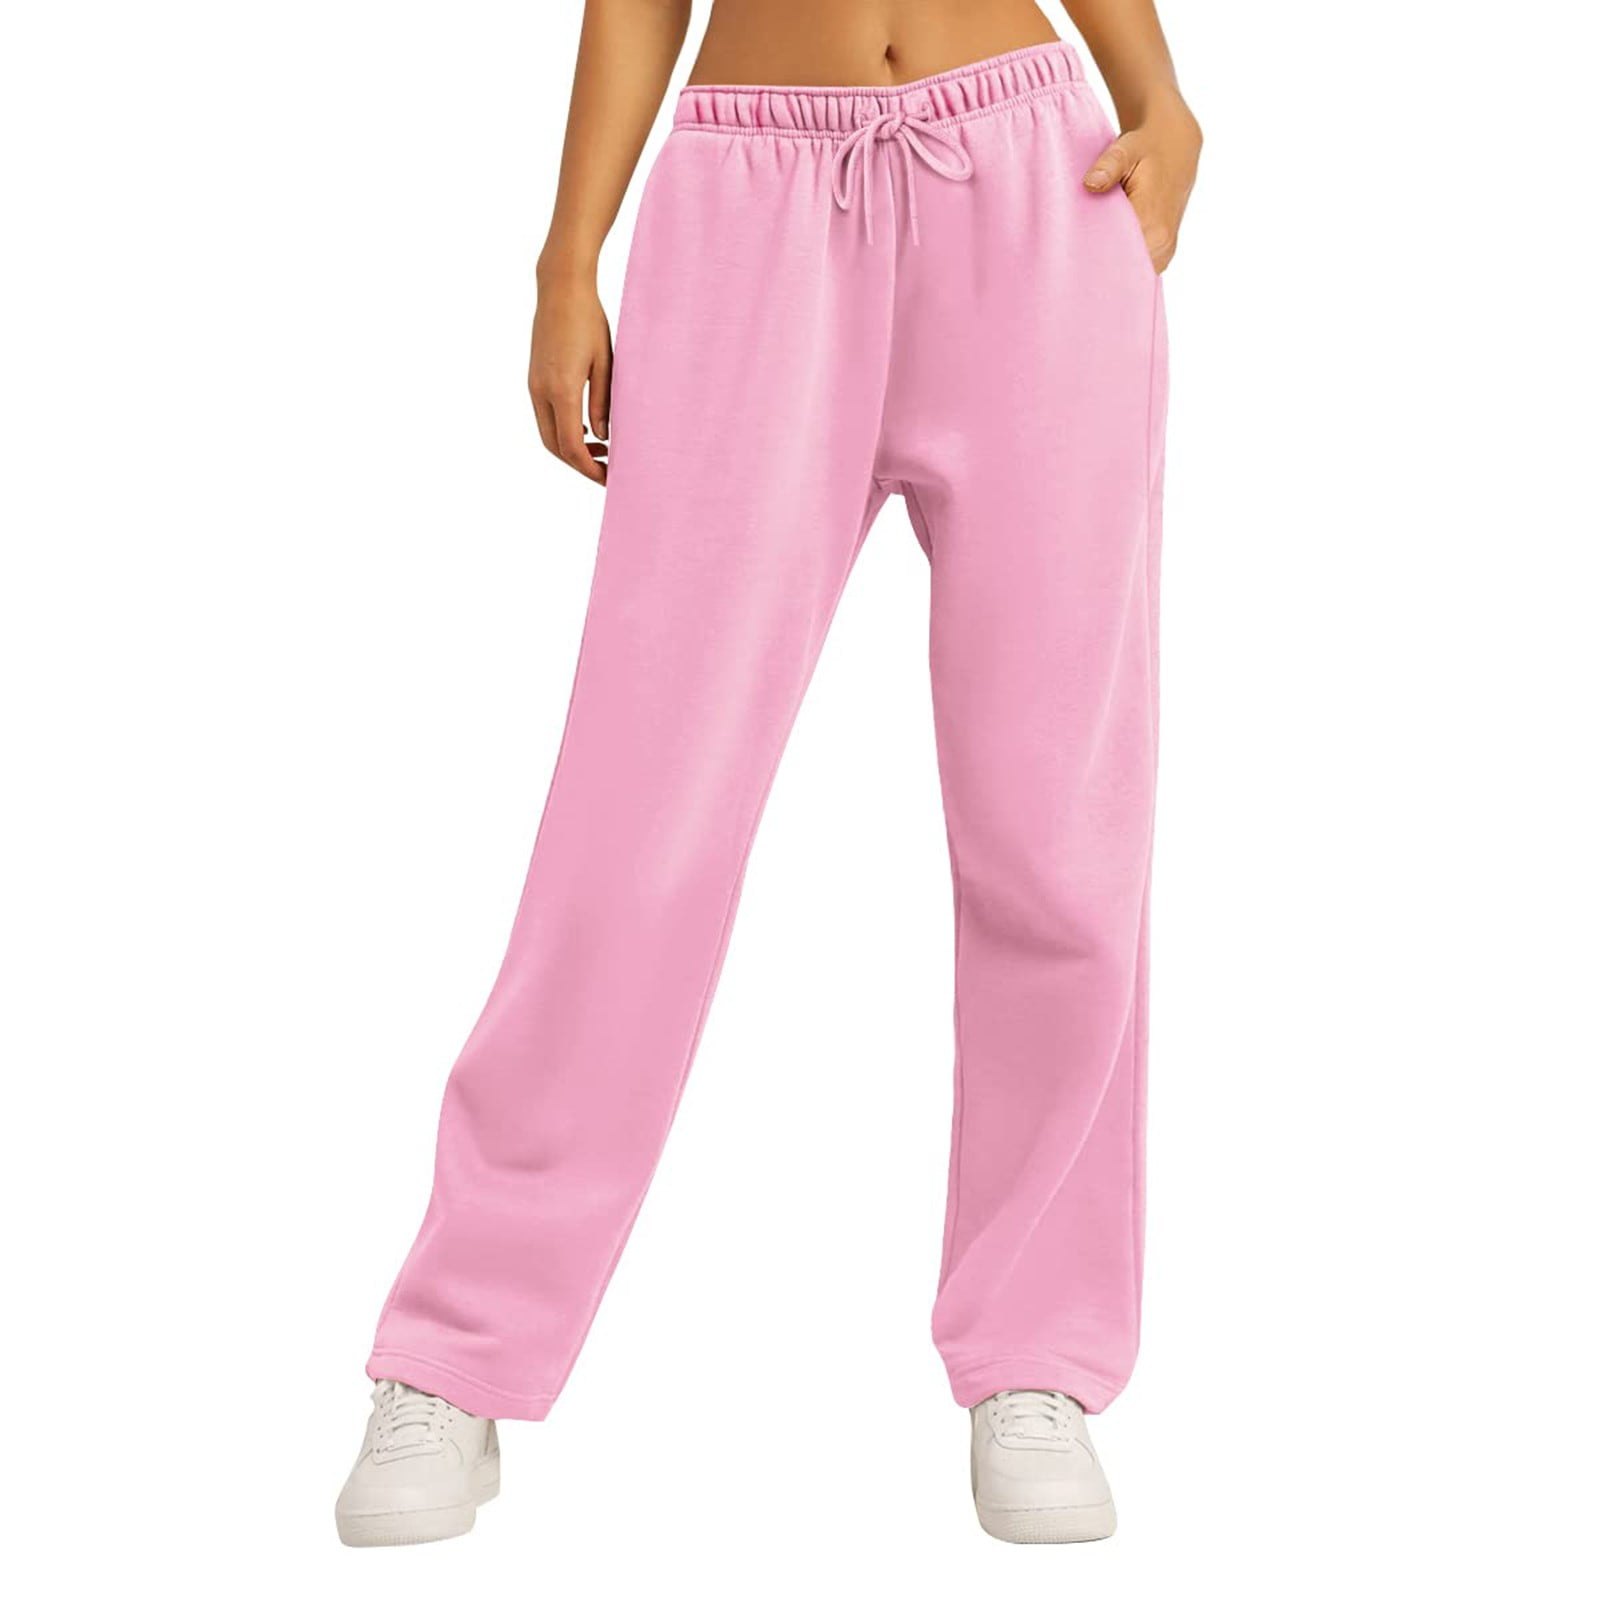 DENGDENG Womens Sweatpants for Teen Girls Solid Color High Waisted